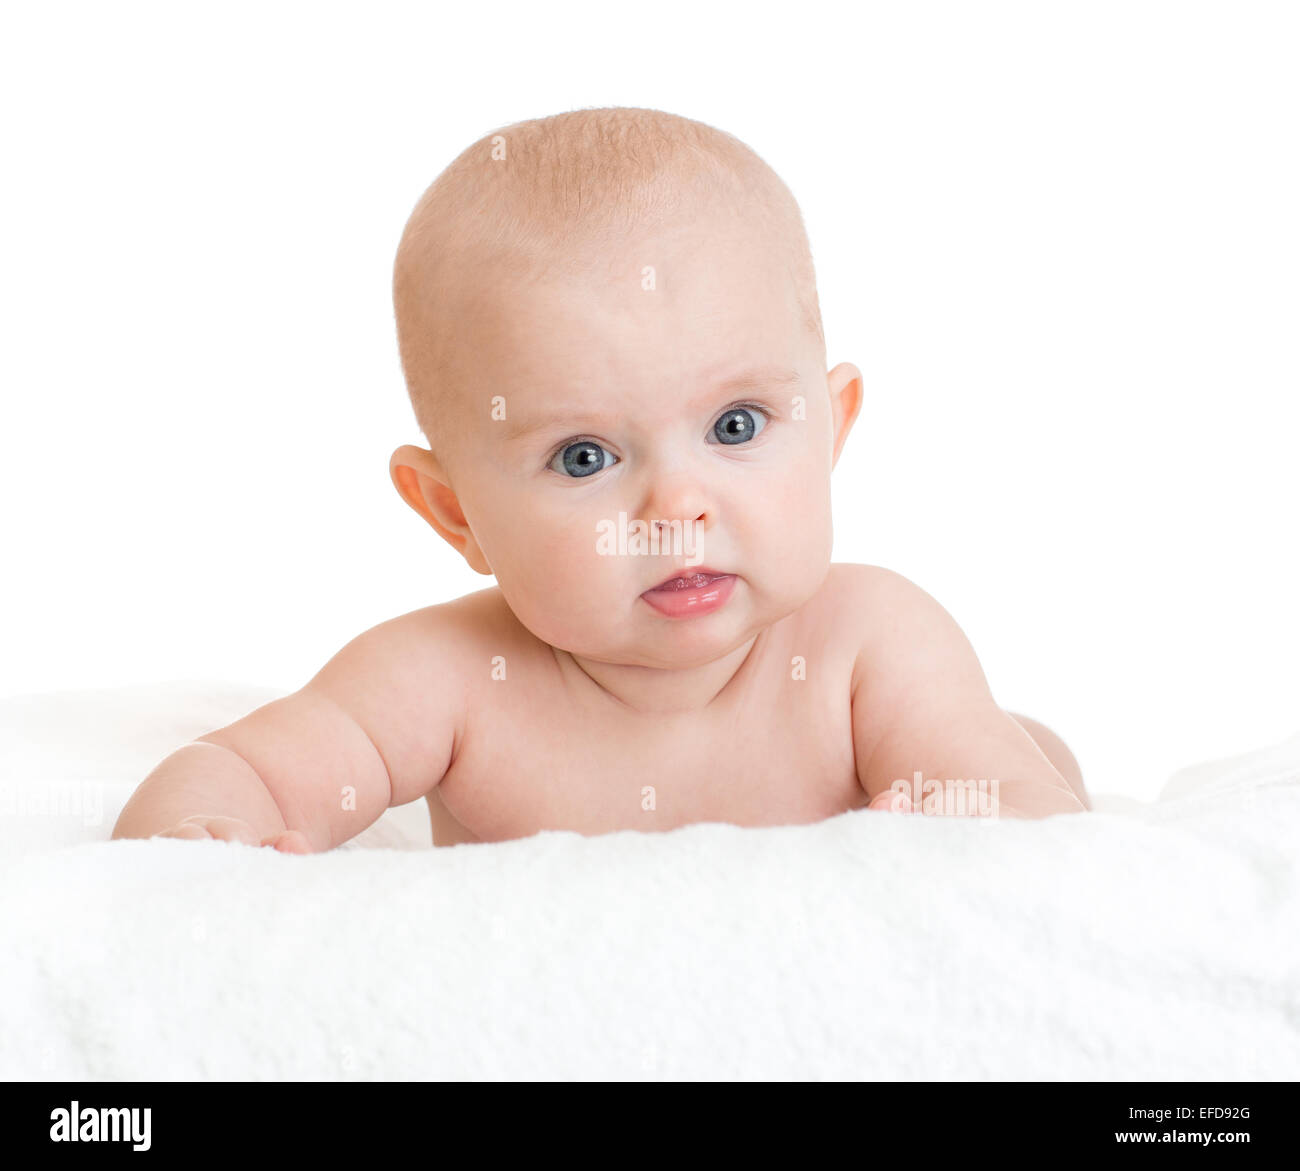 Cute baby lying on white towel Stock Photo